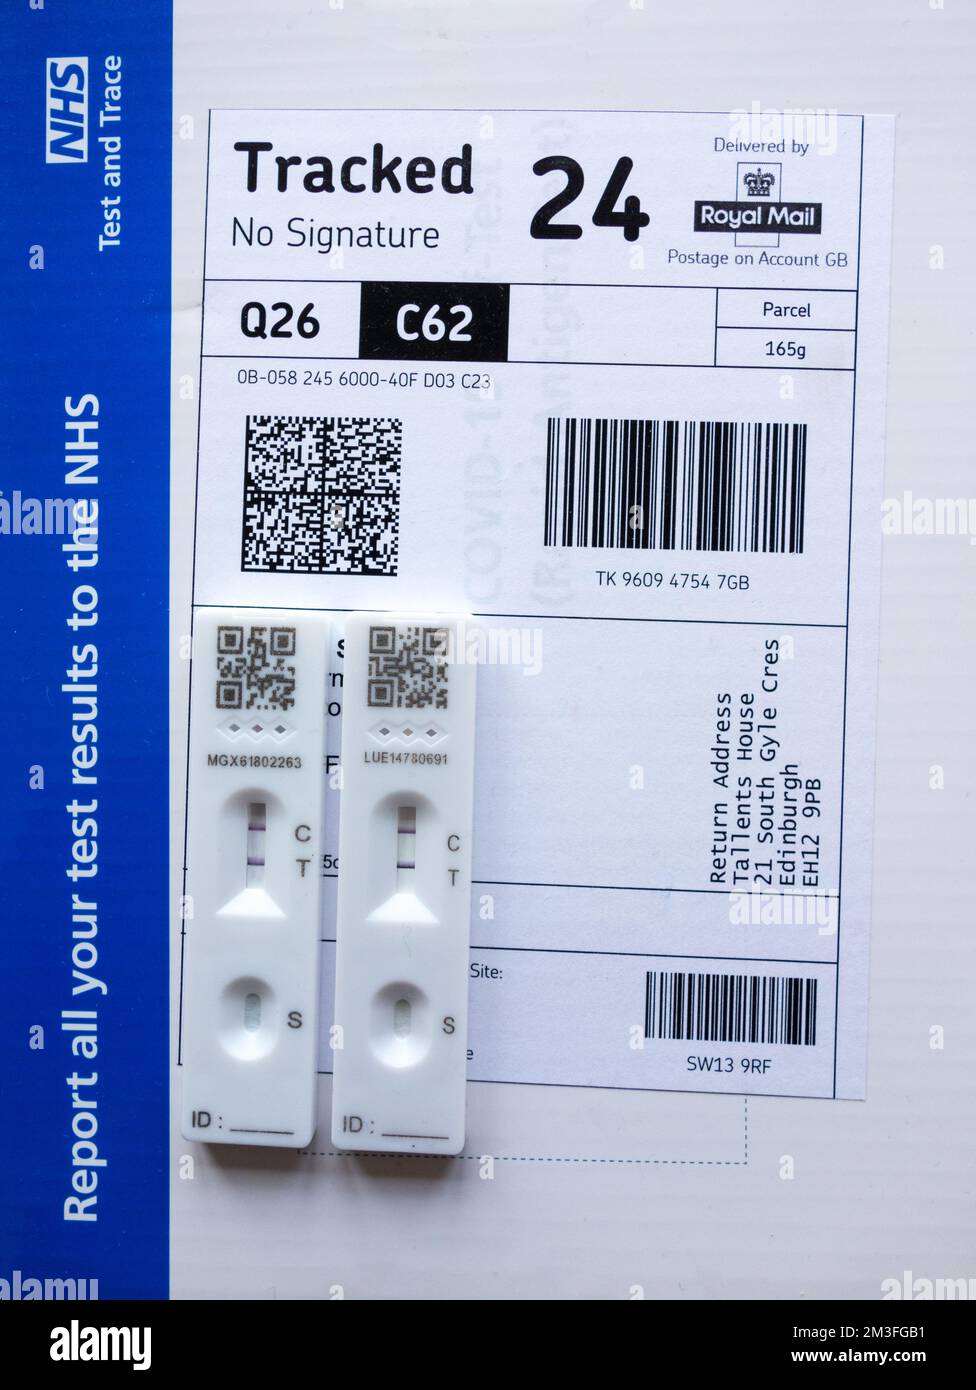 NHS Test, Track and Trace Covid-19 Selbsttest (Rapid Antigen Test) Kits Stockfoto